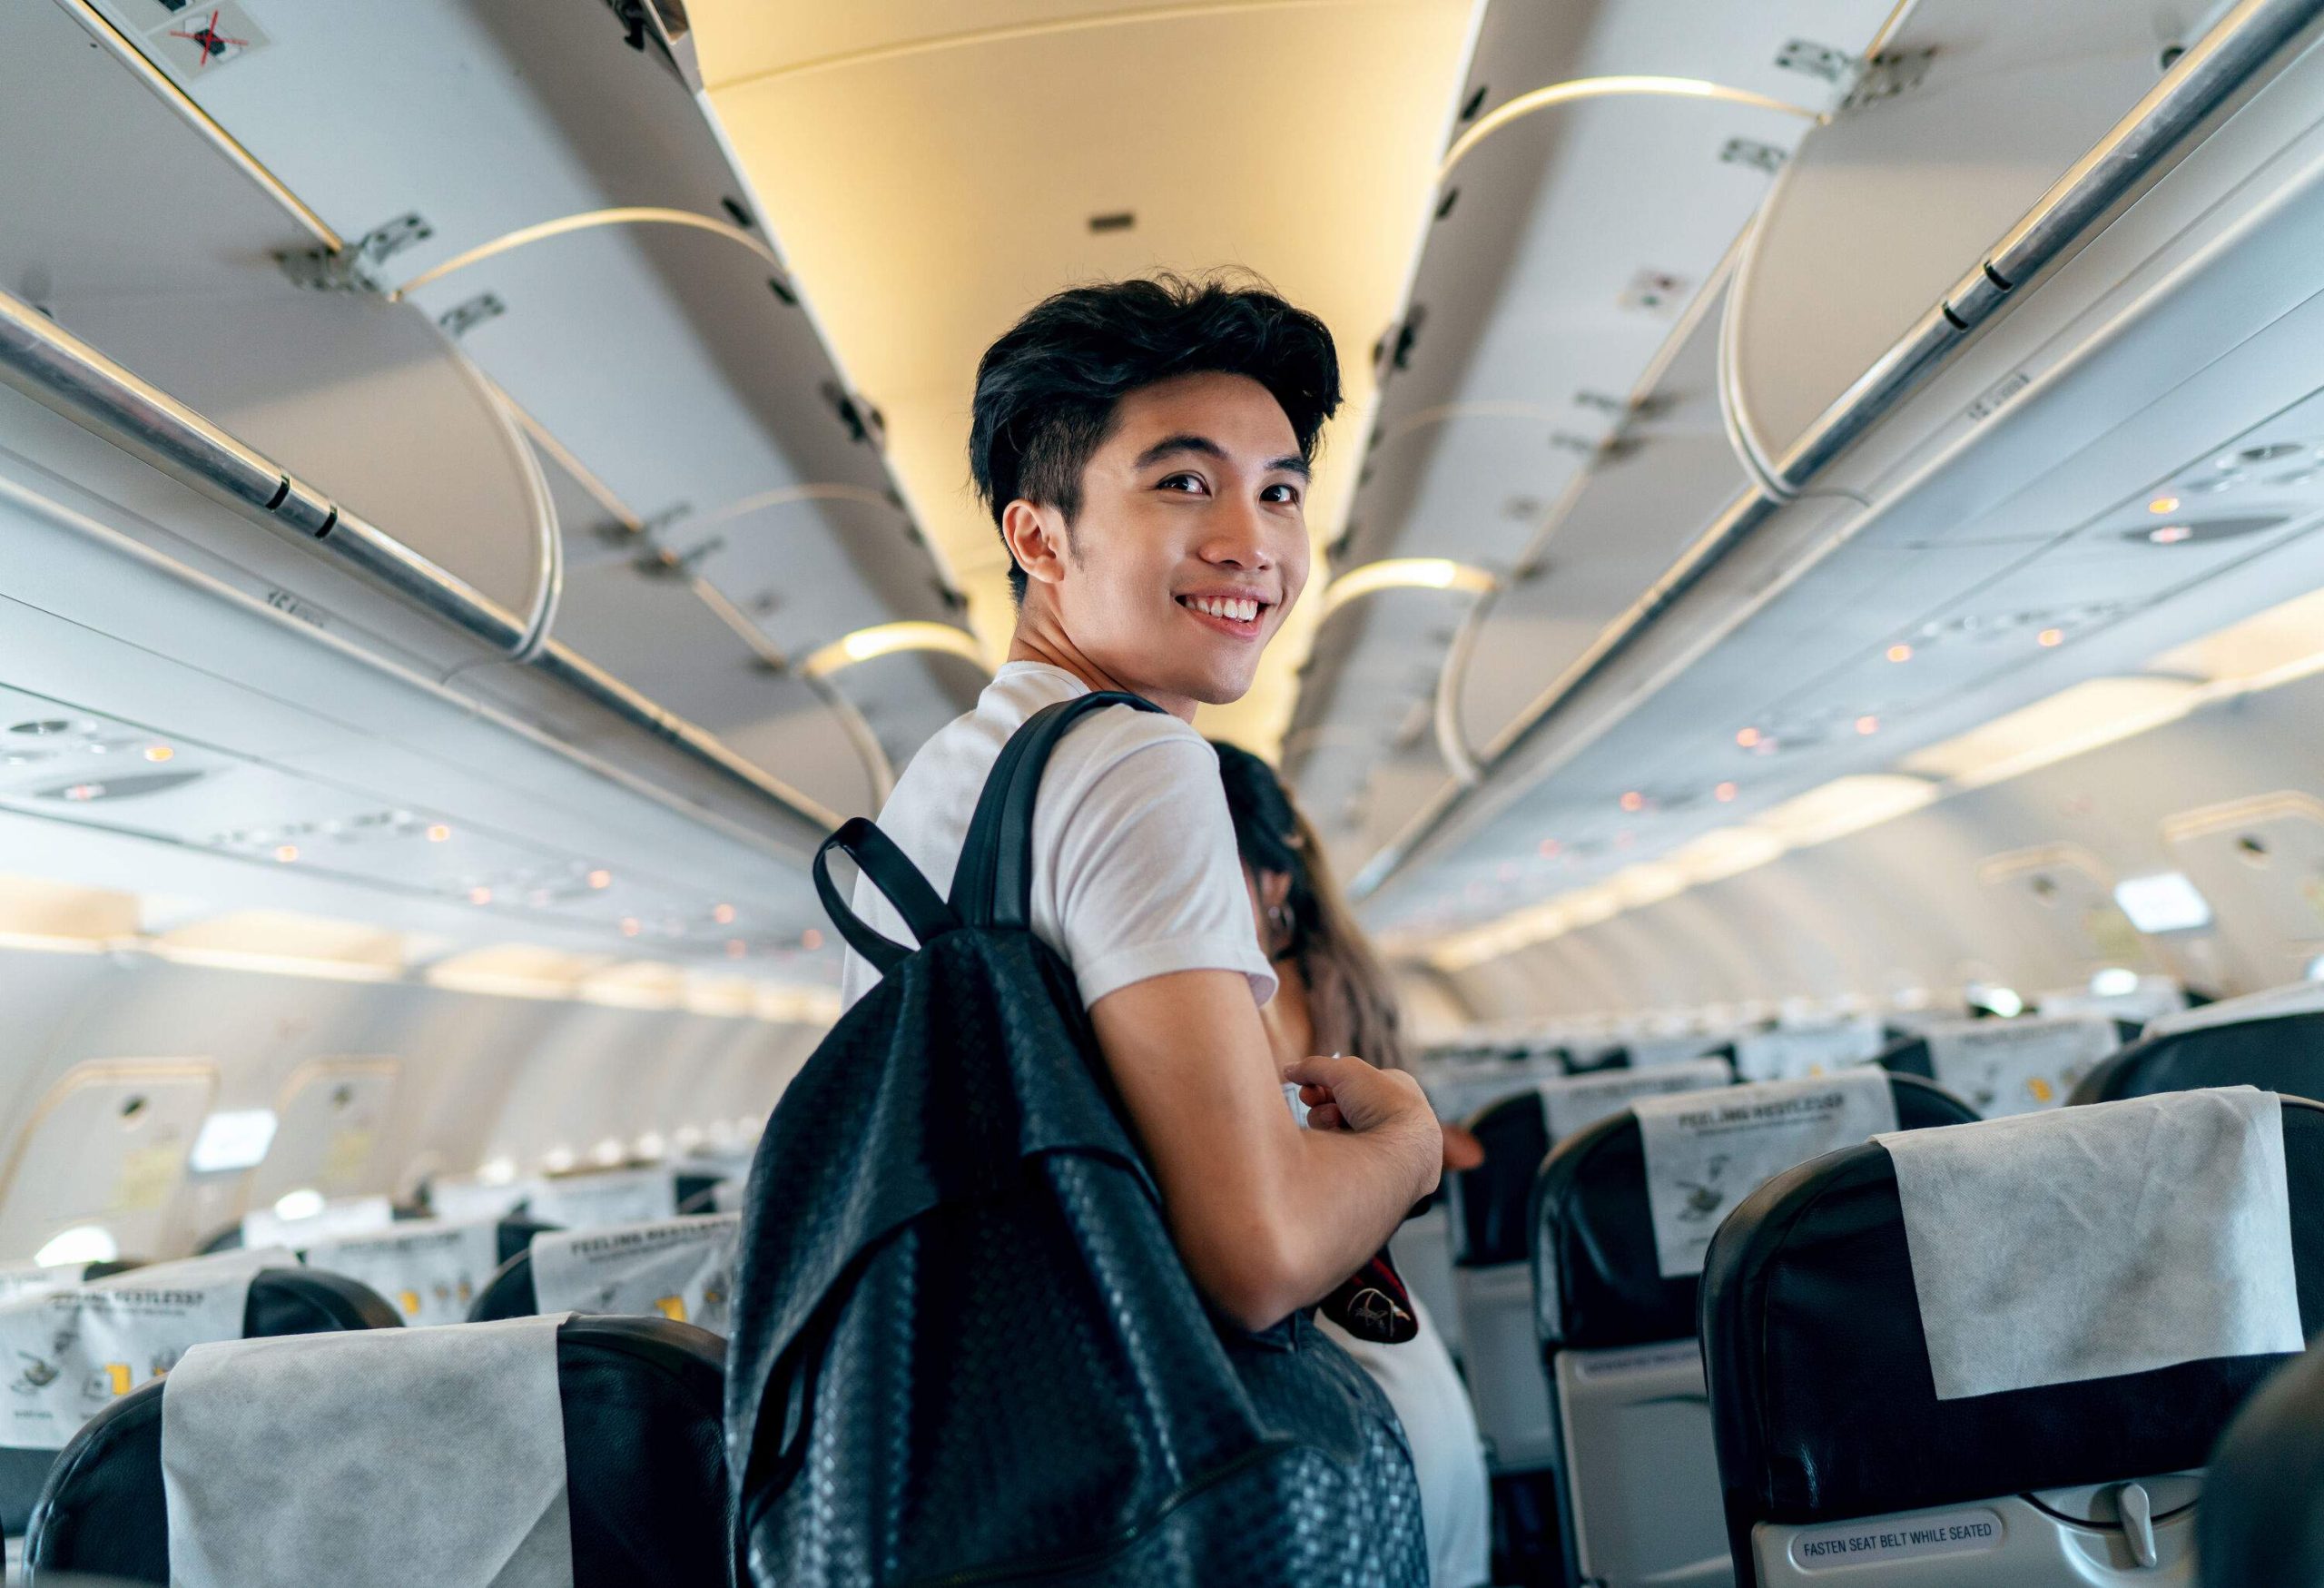 A young Asian male traveller boards a plane, carrying a backpack and glancing back.